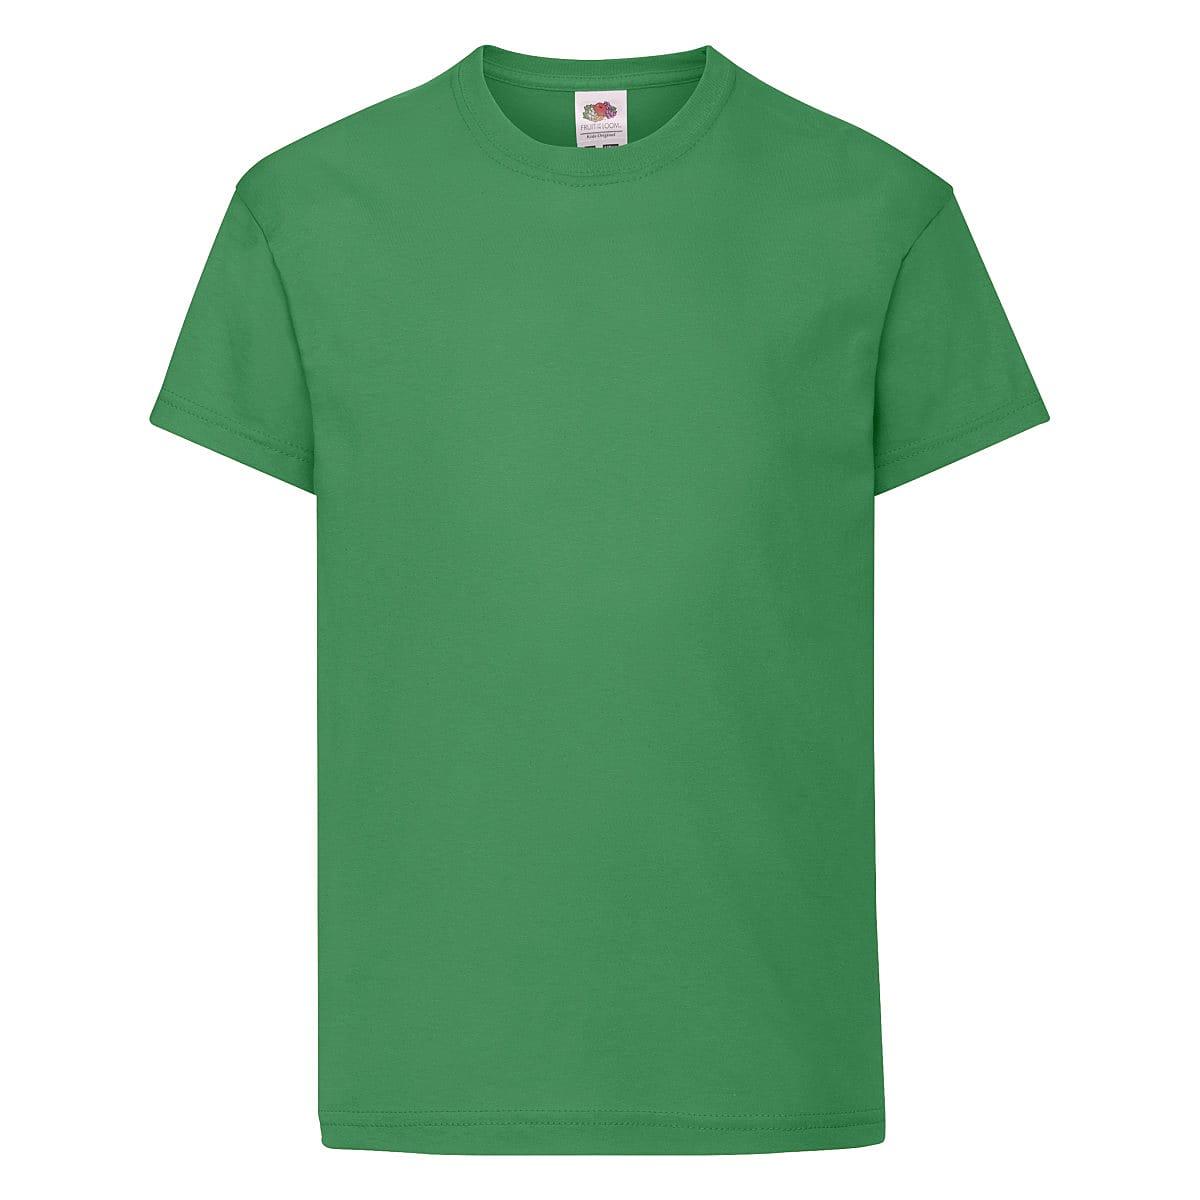 Fruit Of The Loom Kids Original T-Shirt in Kelly Green (Product Code: 61019)